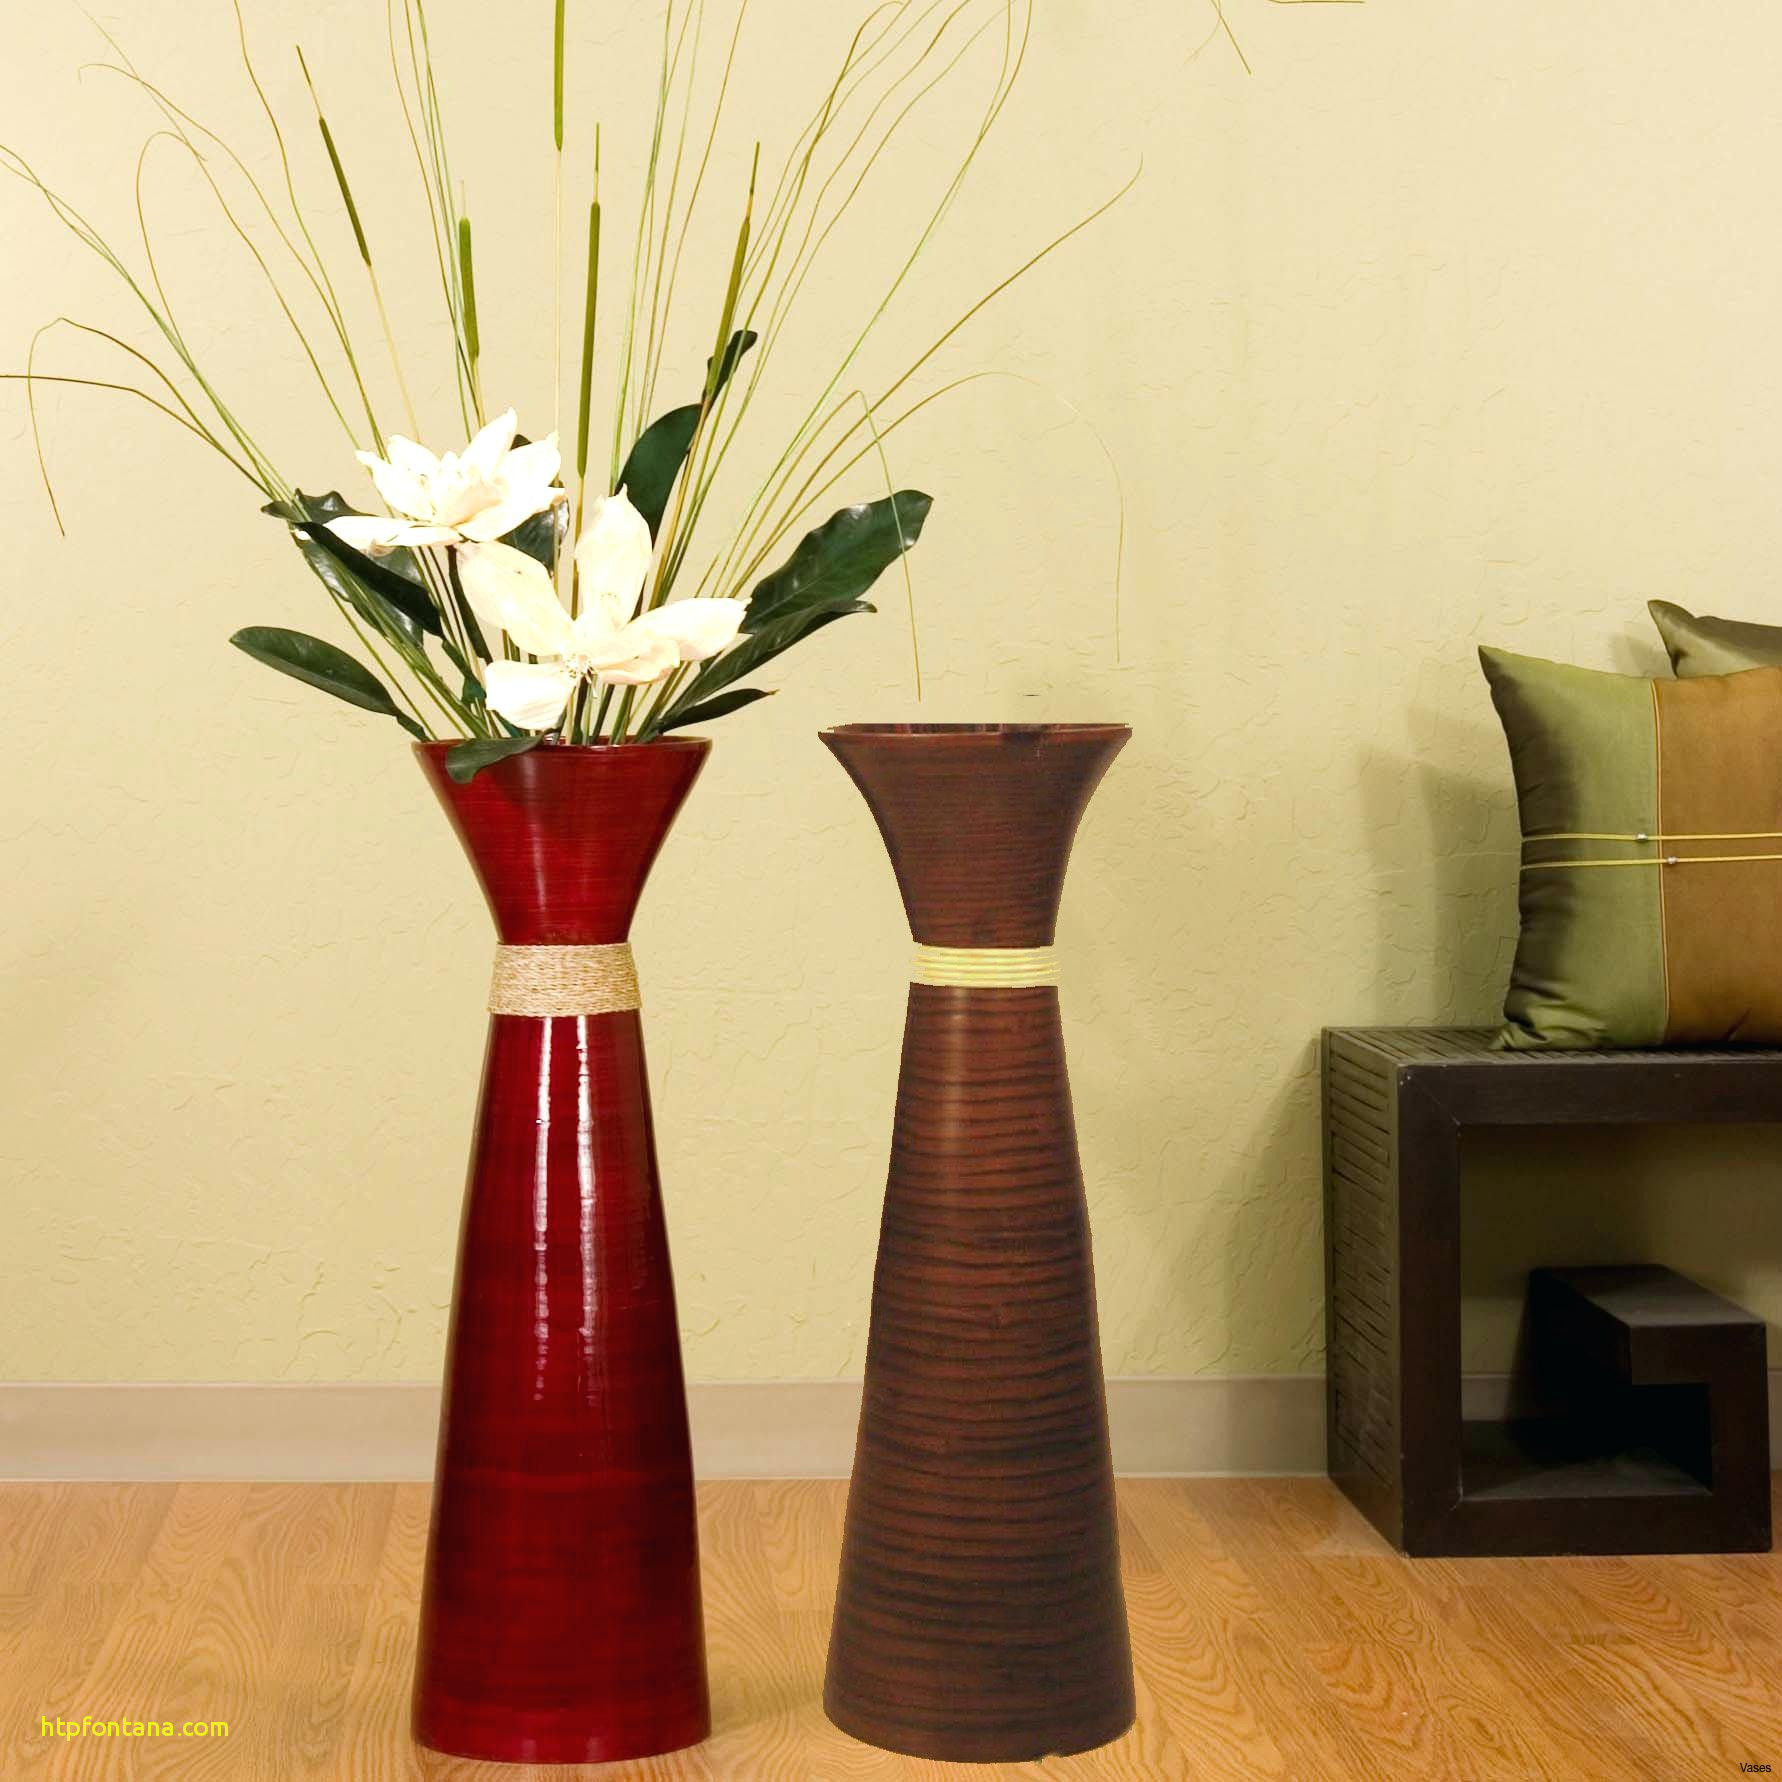 29 Unique Ice Cream Vase 2024 free download ice cream vase of floor vase with sticks collection vases vase with sticks red in a i intended for floor vase with sticks image living room decor vases best decorative colorful red sticks in